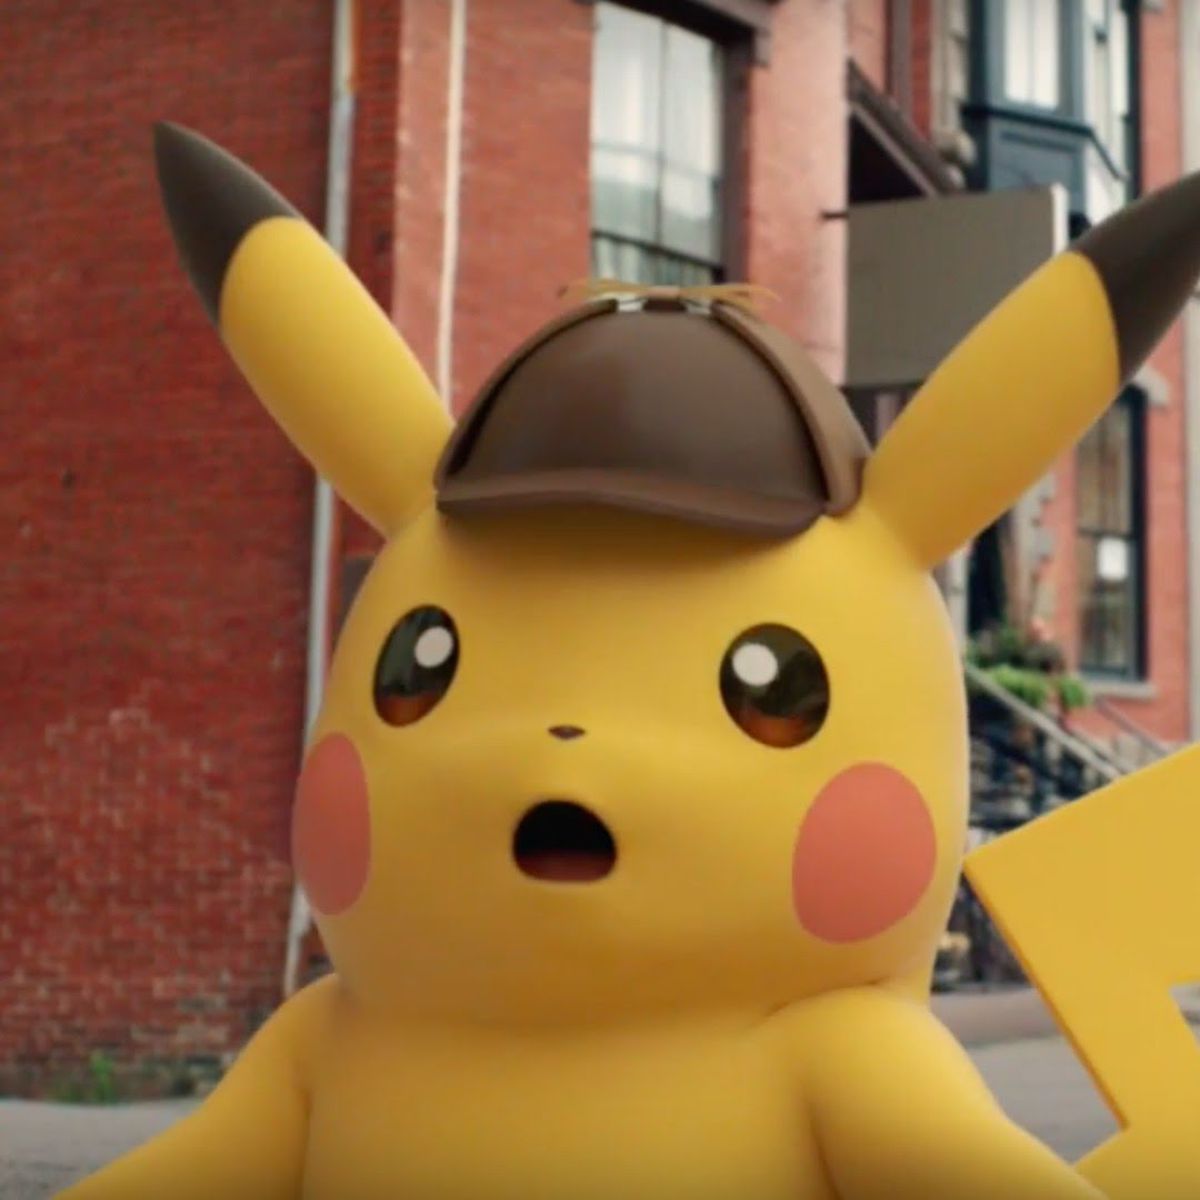 Detective Pikachu has a surprised expression on his face.